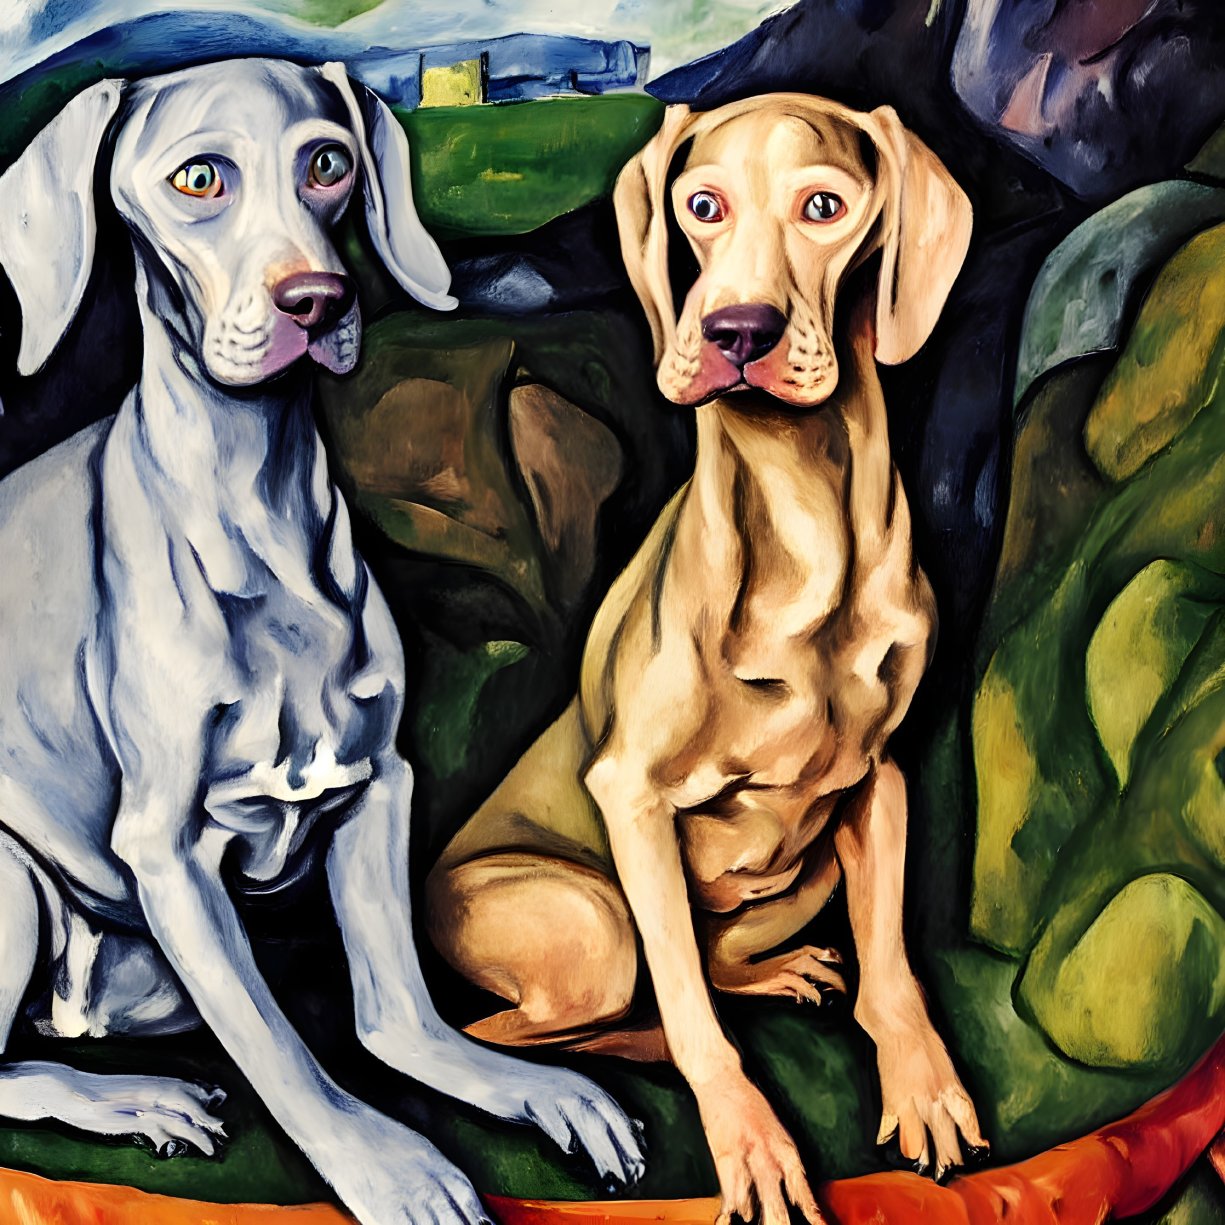 Abstract painting of two dogs with human-like eyes on colorful background